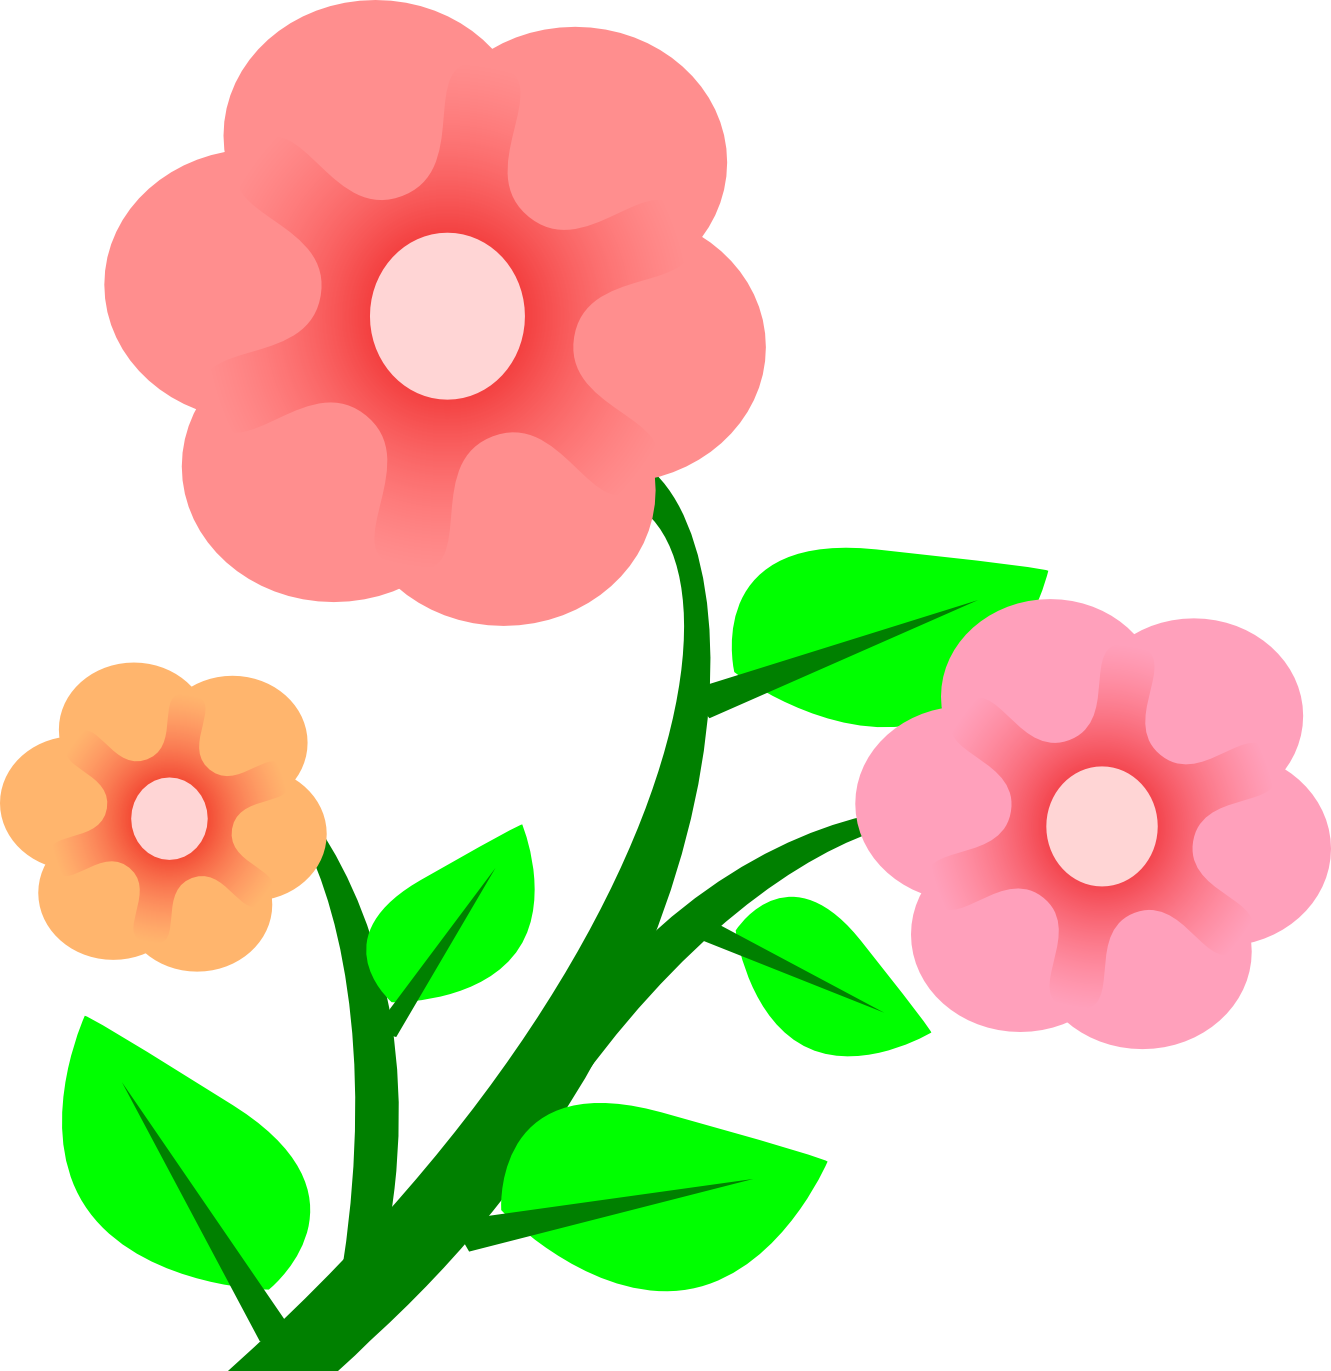 Groovy Flowers Clip Art   Cliparts Co